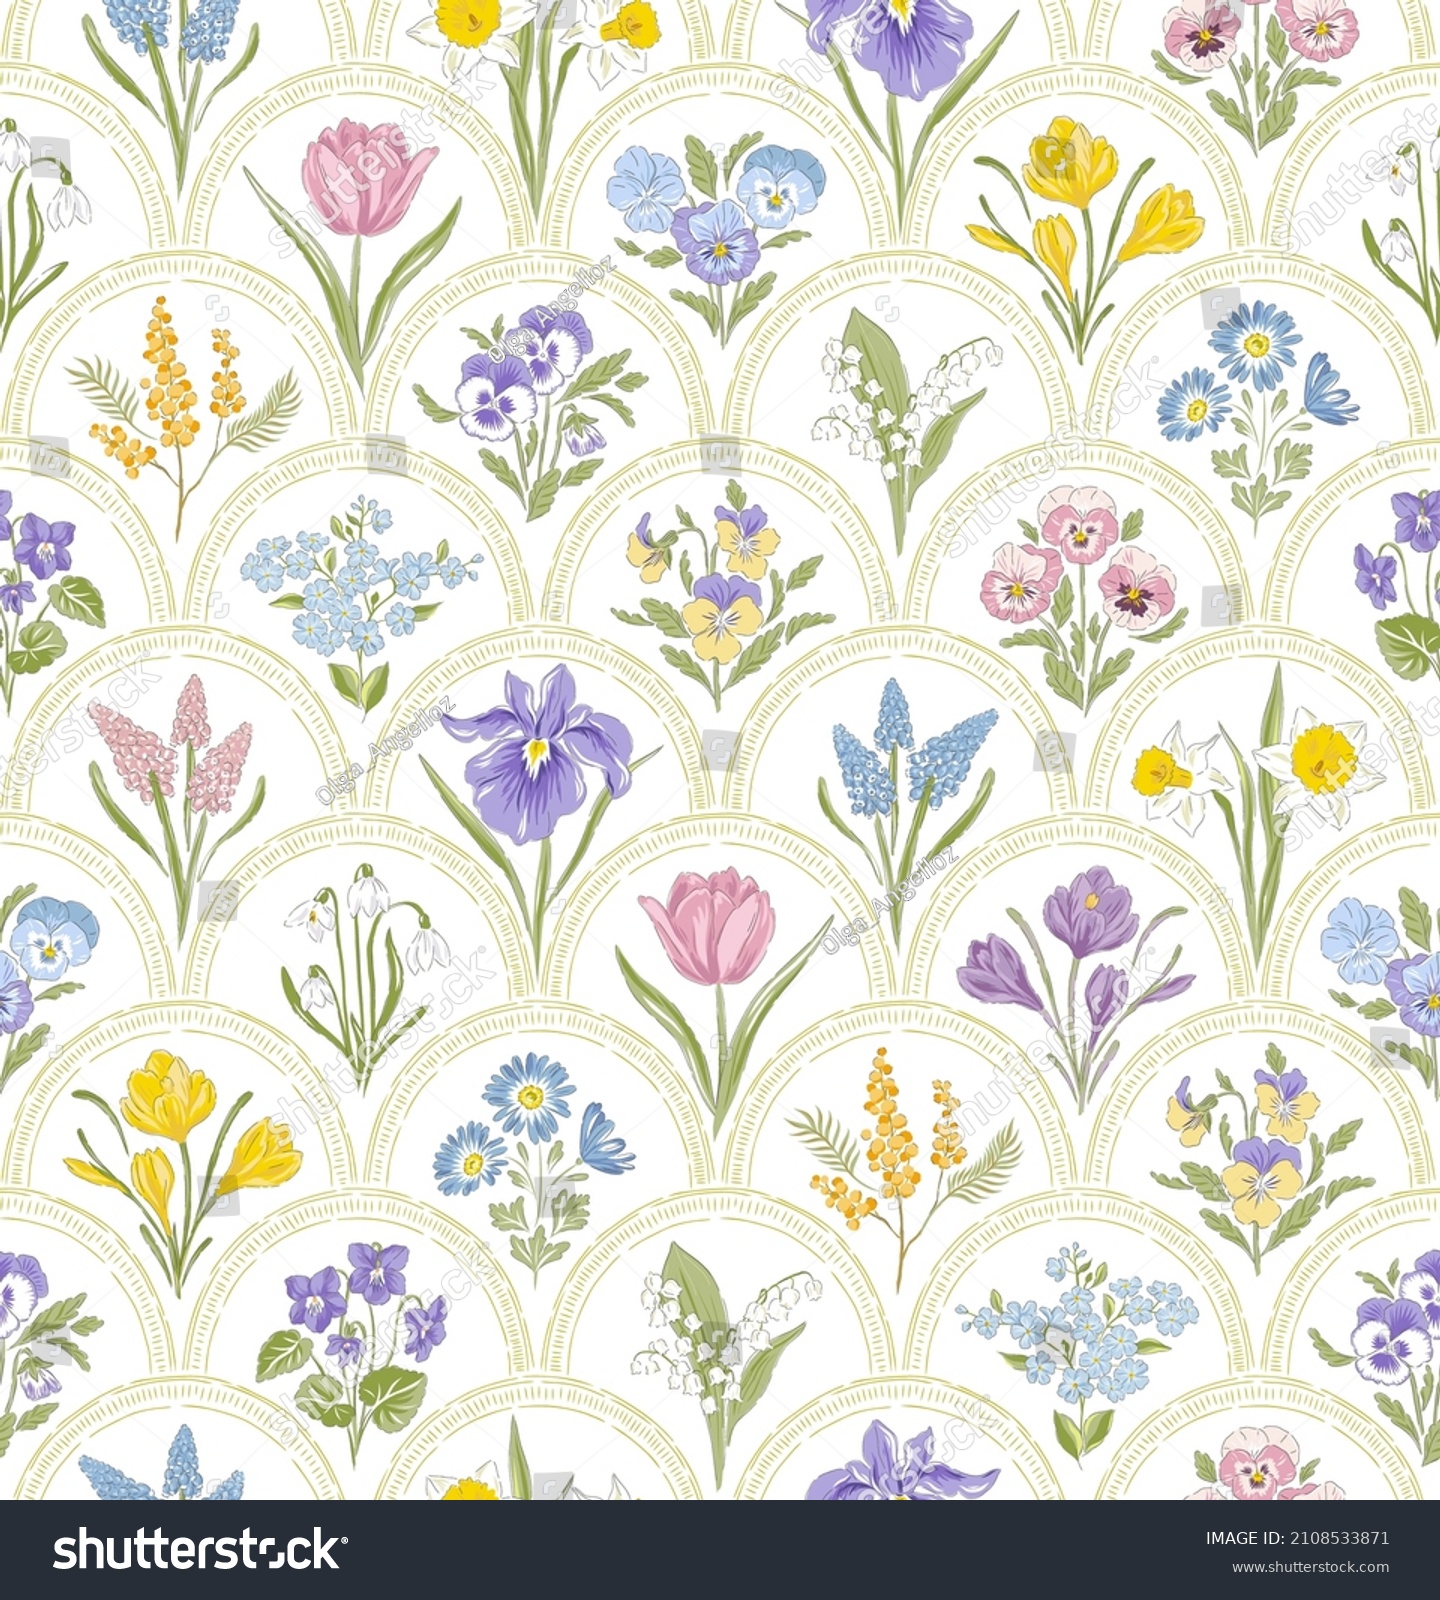 Spring Garden variety flowers in rainbow medallion hand drawn vector seamless pattern. Vintage Romantic Bloom design. Cottage core aesthetic floral print for fabric, scrapbook, wrapping, card making #2108533871